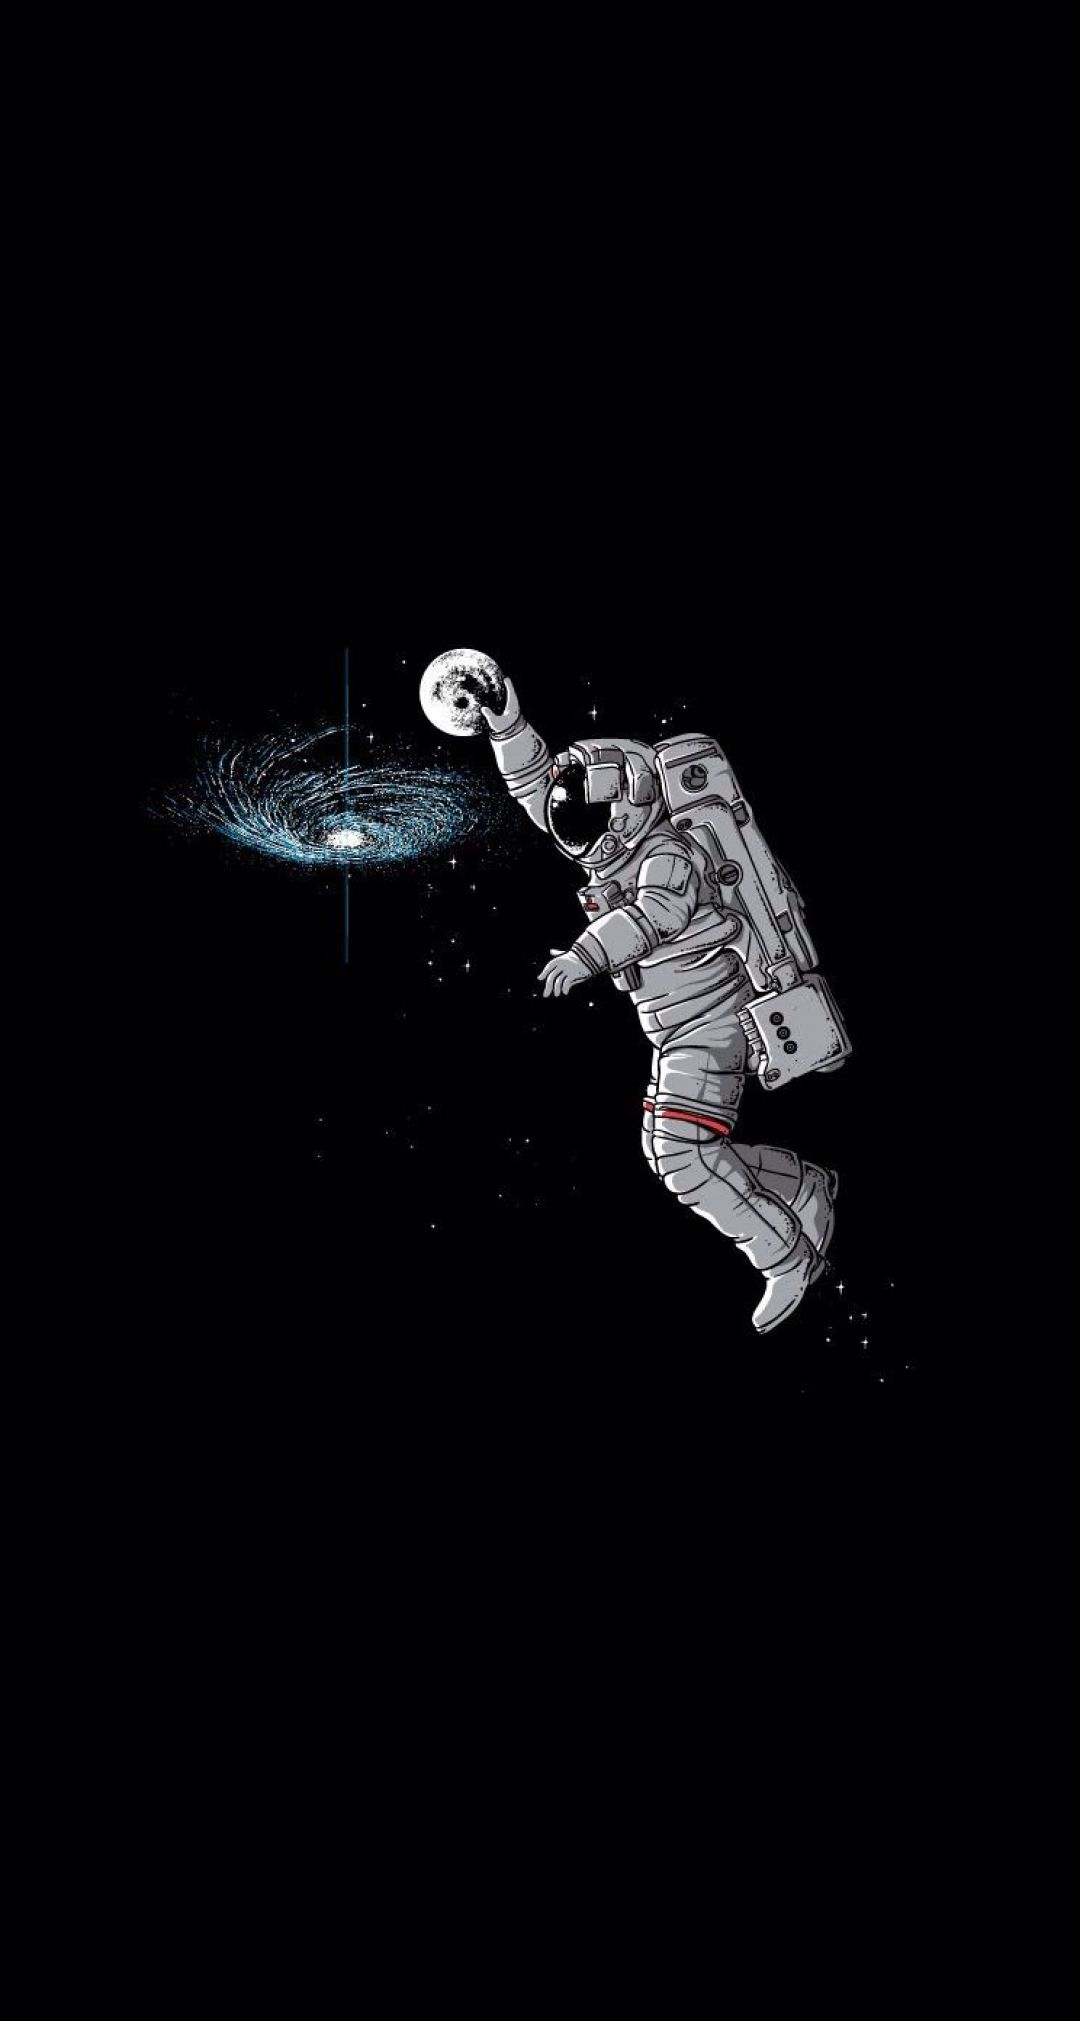 ✓[80+] Astronaut dunk - iPhone wallpaper. iPhone 8 & iPhone X - Android /  iPhone HD Wallpaper Background Download (png / jpg) (2023)